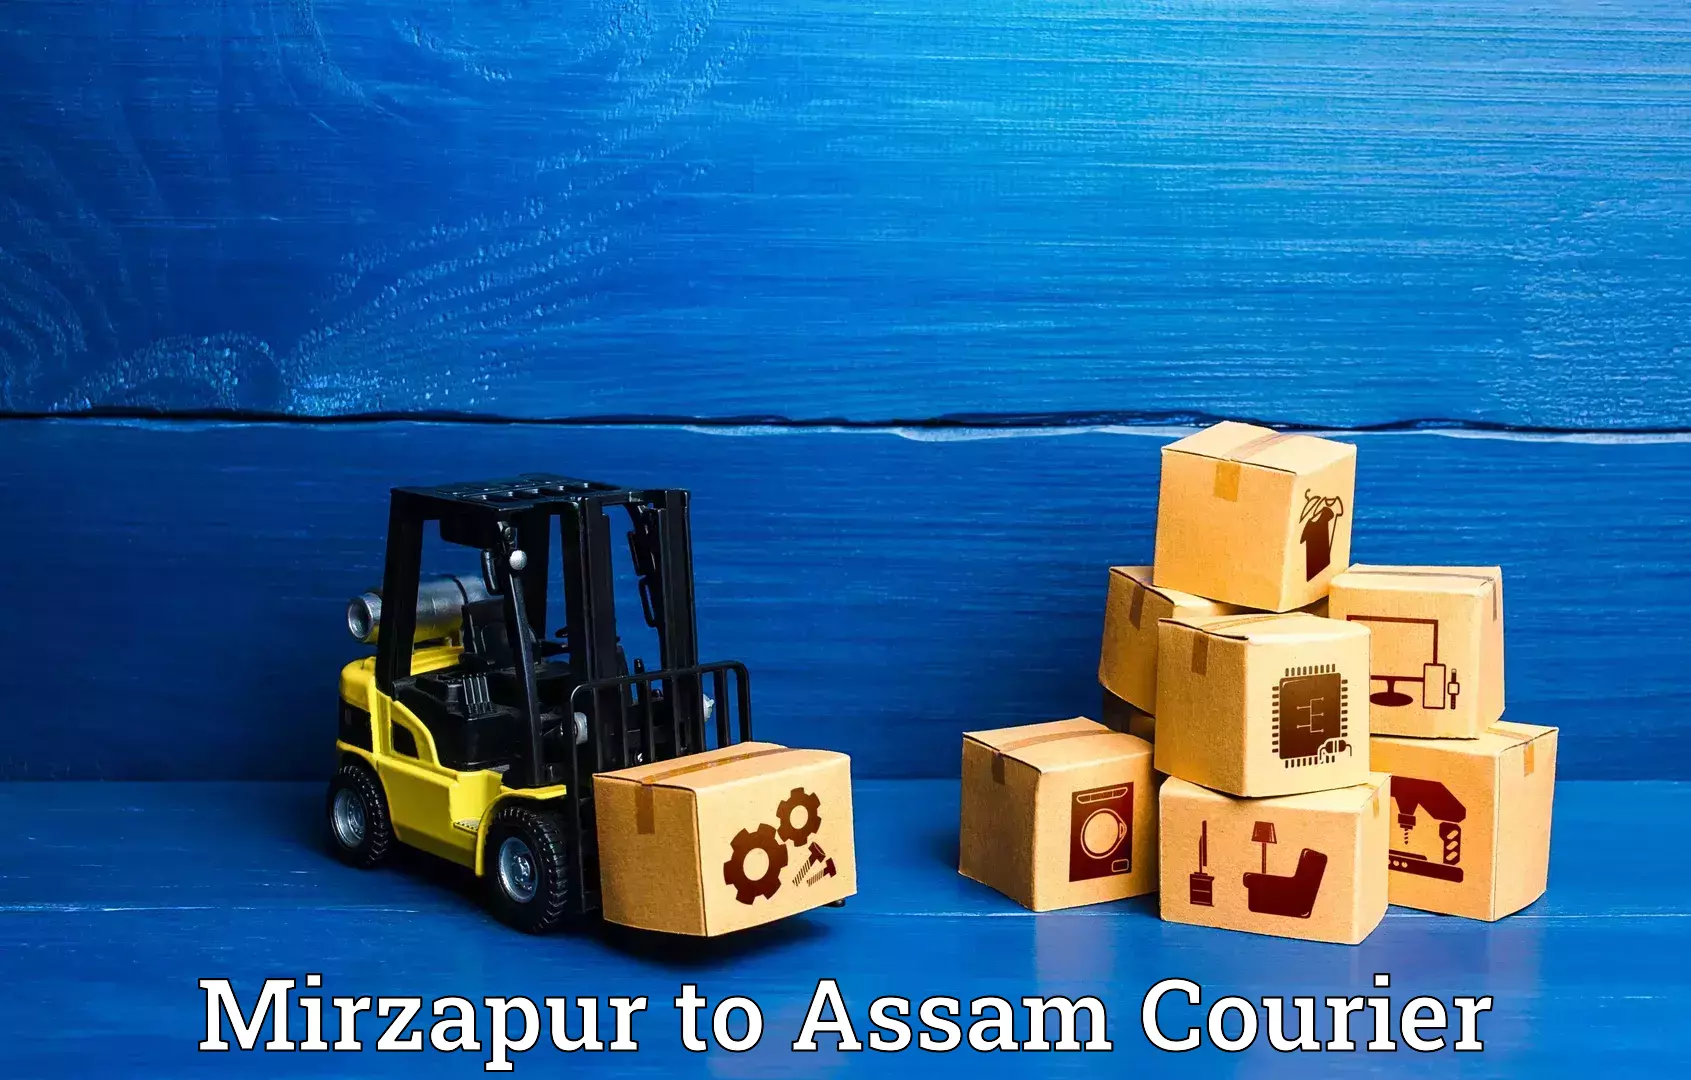 Hassle-free luggage shipping in Mirzapur to Lala Assam